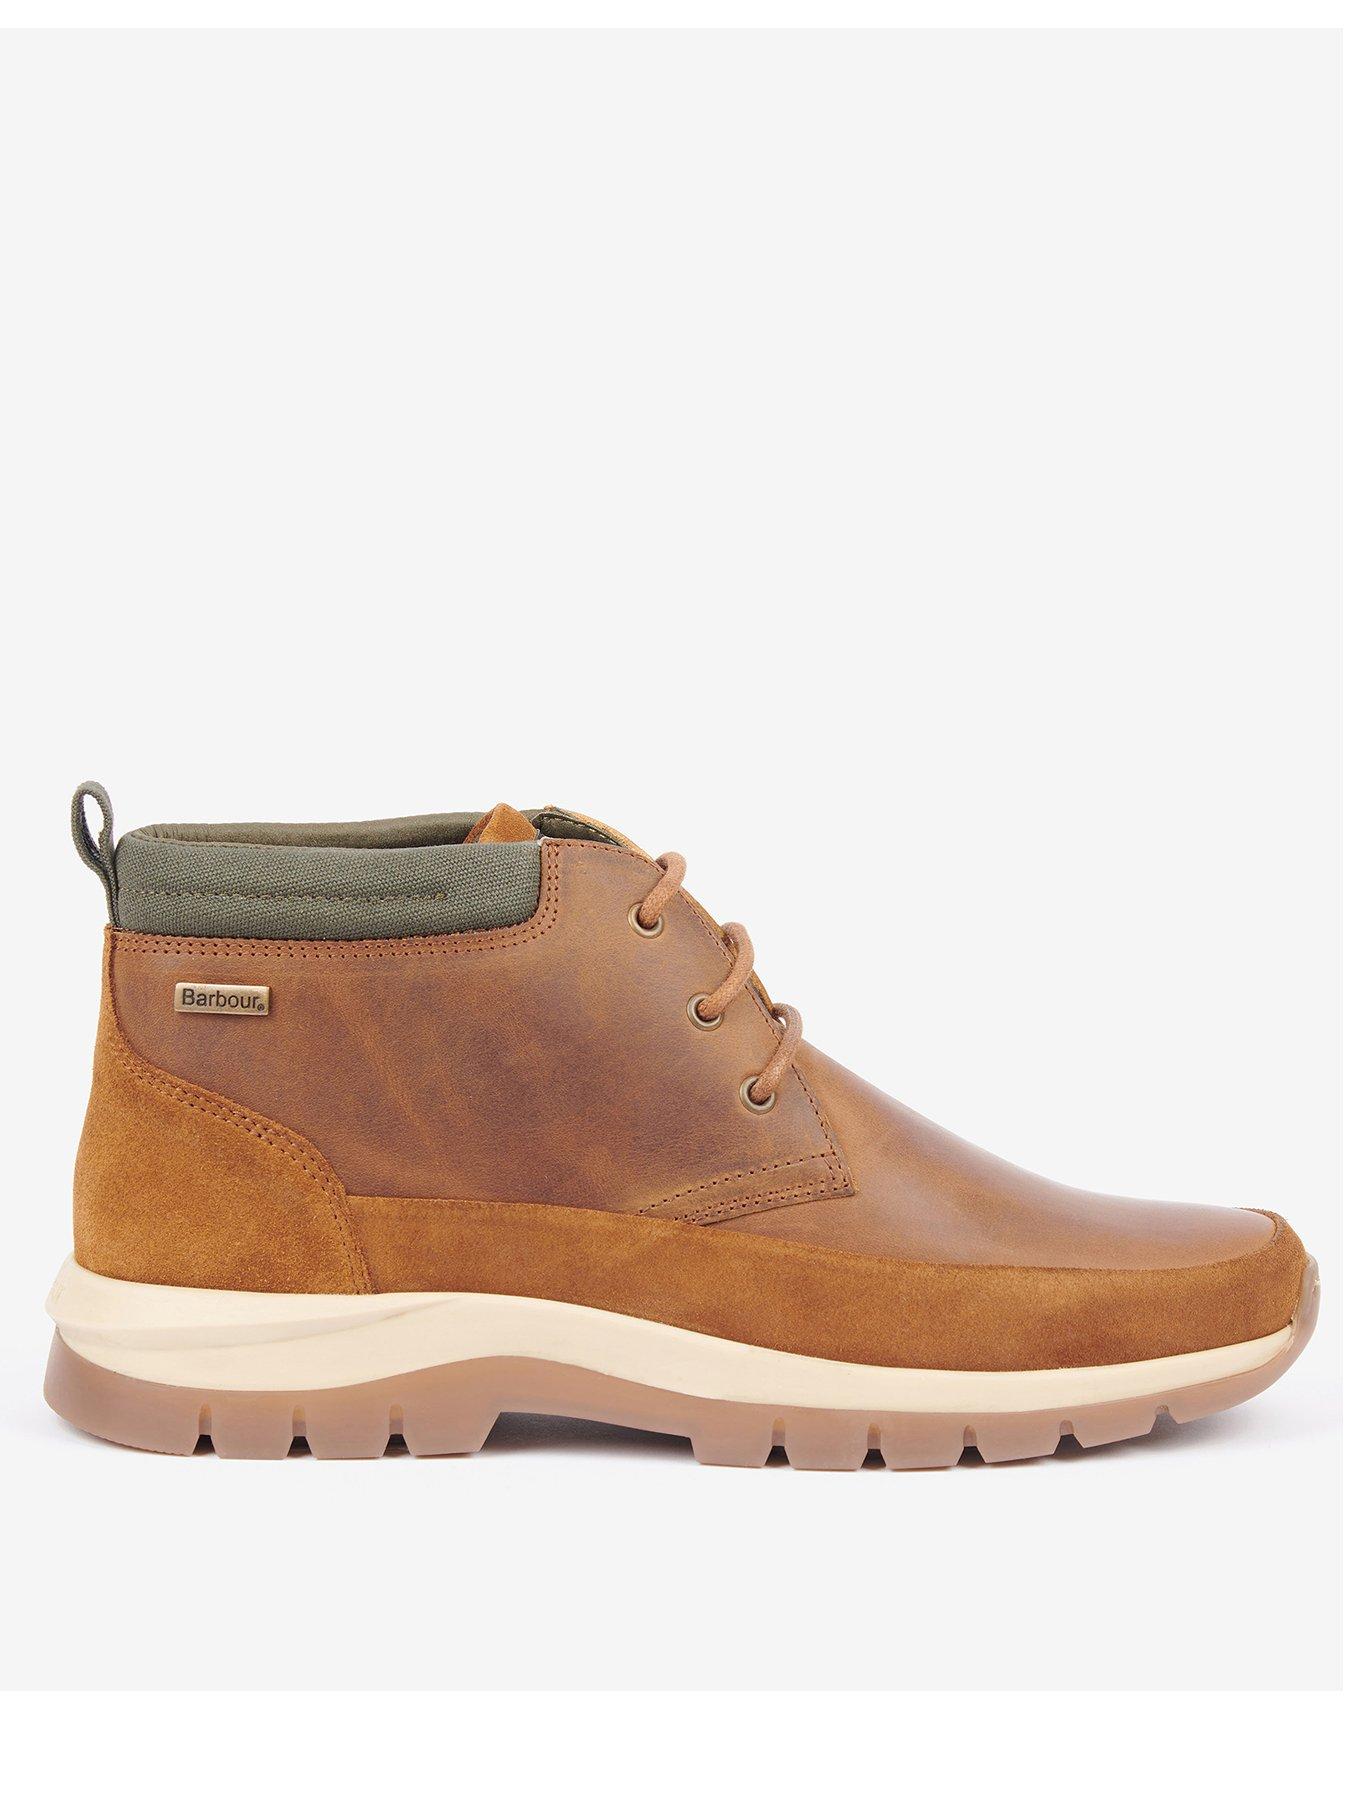 Barbour Underwood Suede Leather Boots | littlewoods.com